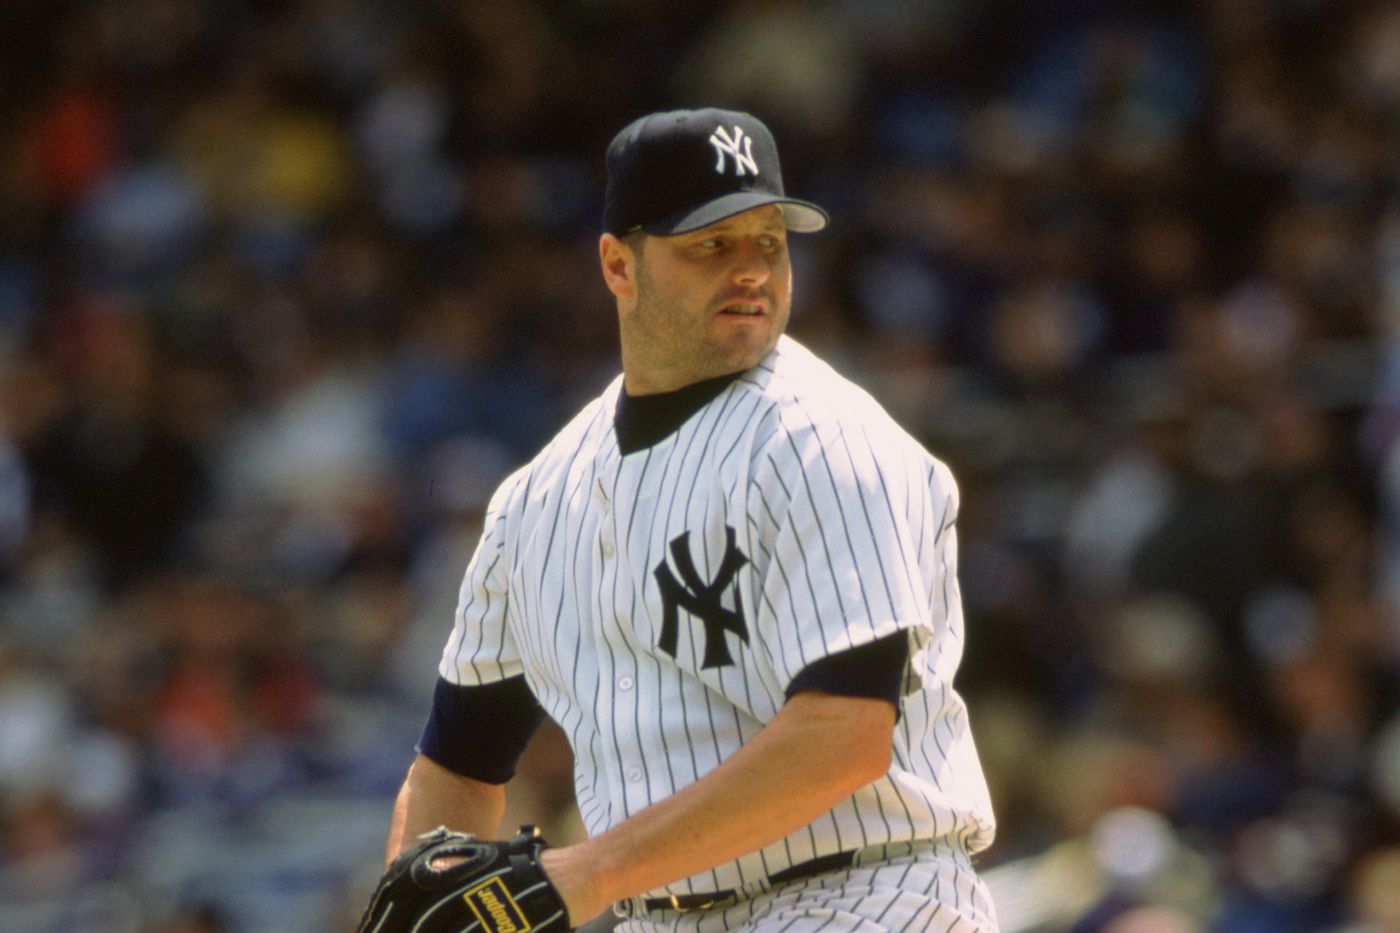 roger clemens age